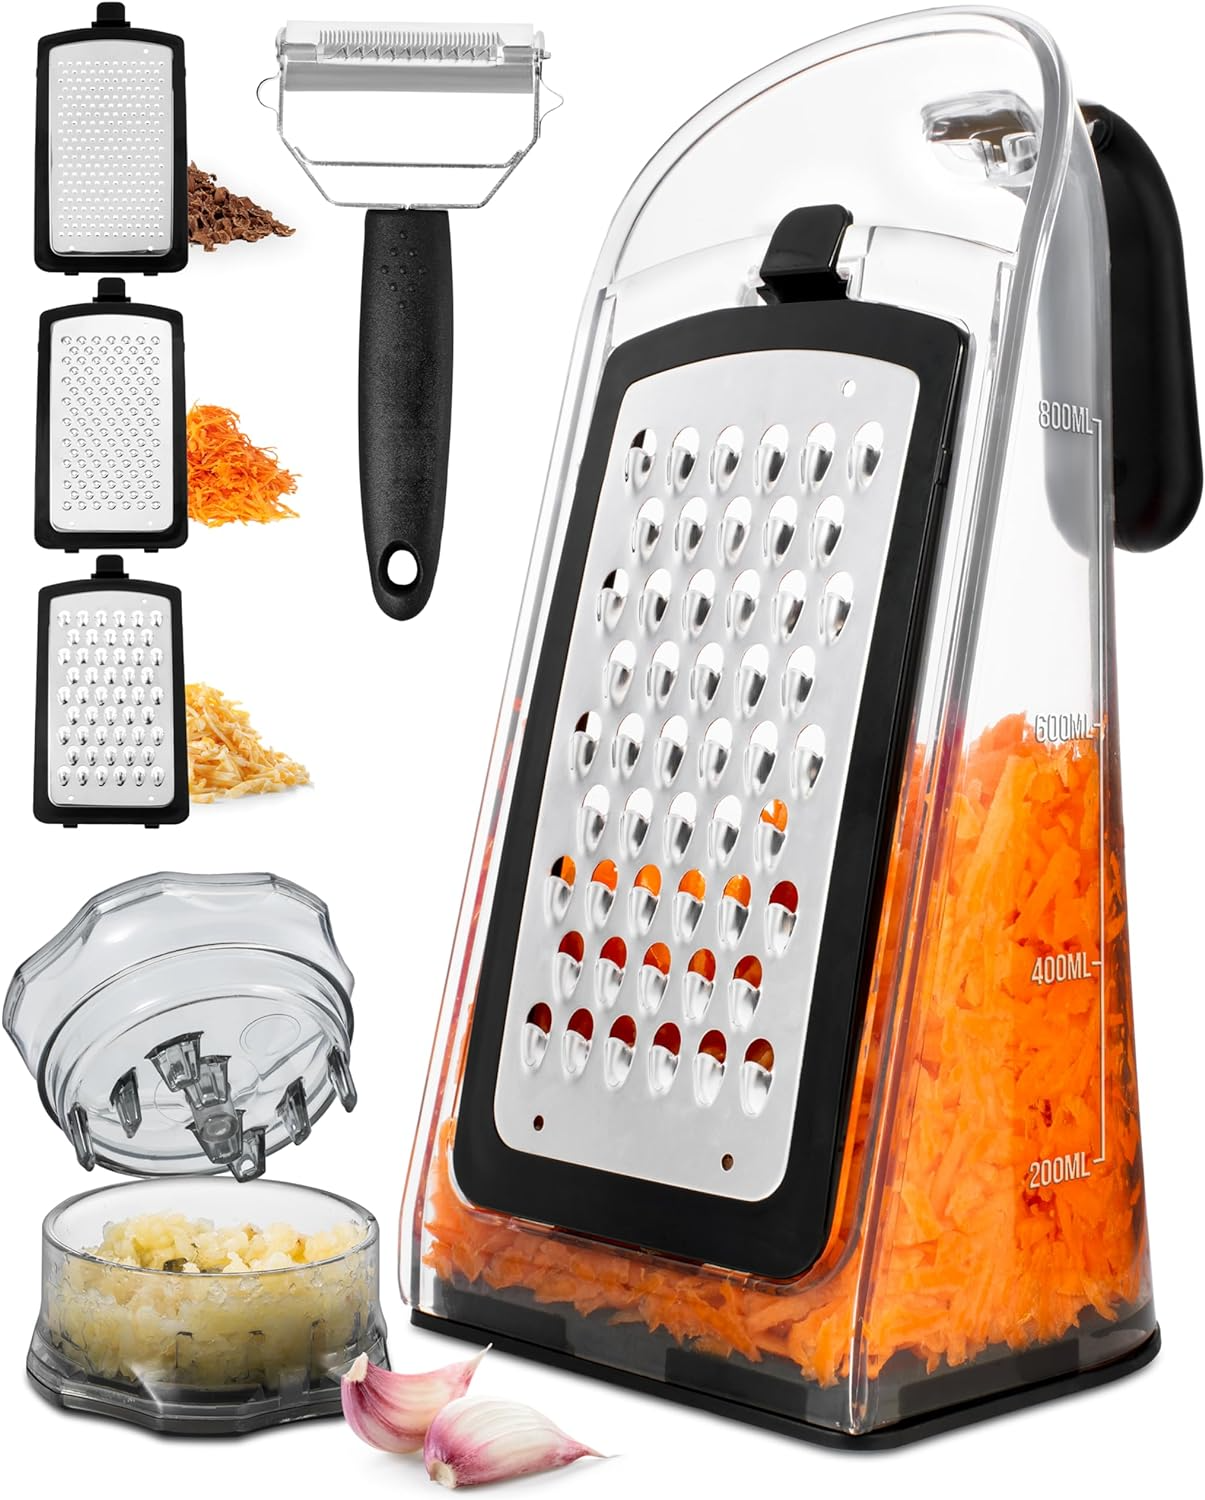 Cheese Grater with Garlic Crusher - Box Grater Cheese Shredder - Cheese Grater with Handle - Graters for Kitchen Stainless Steel Food Grater - Garlic Mincer Tool and Vegetable Peeler - Barbecue Whizz...Watch My Smoke!